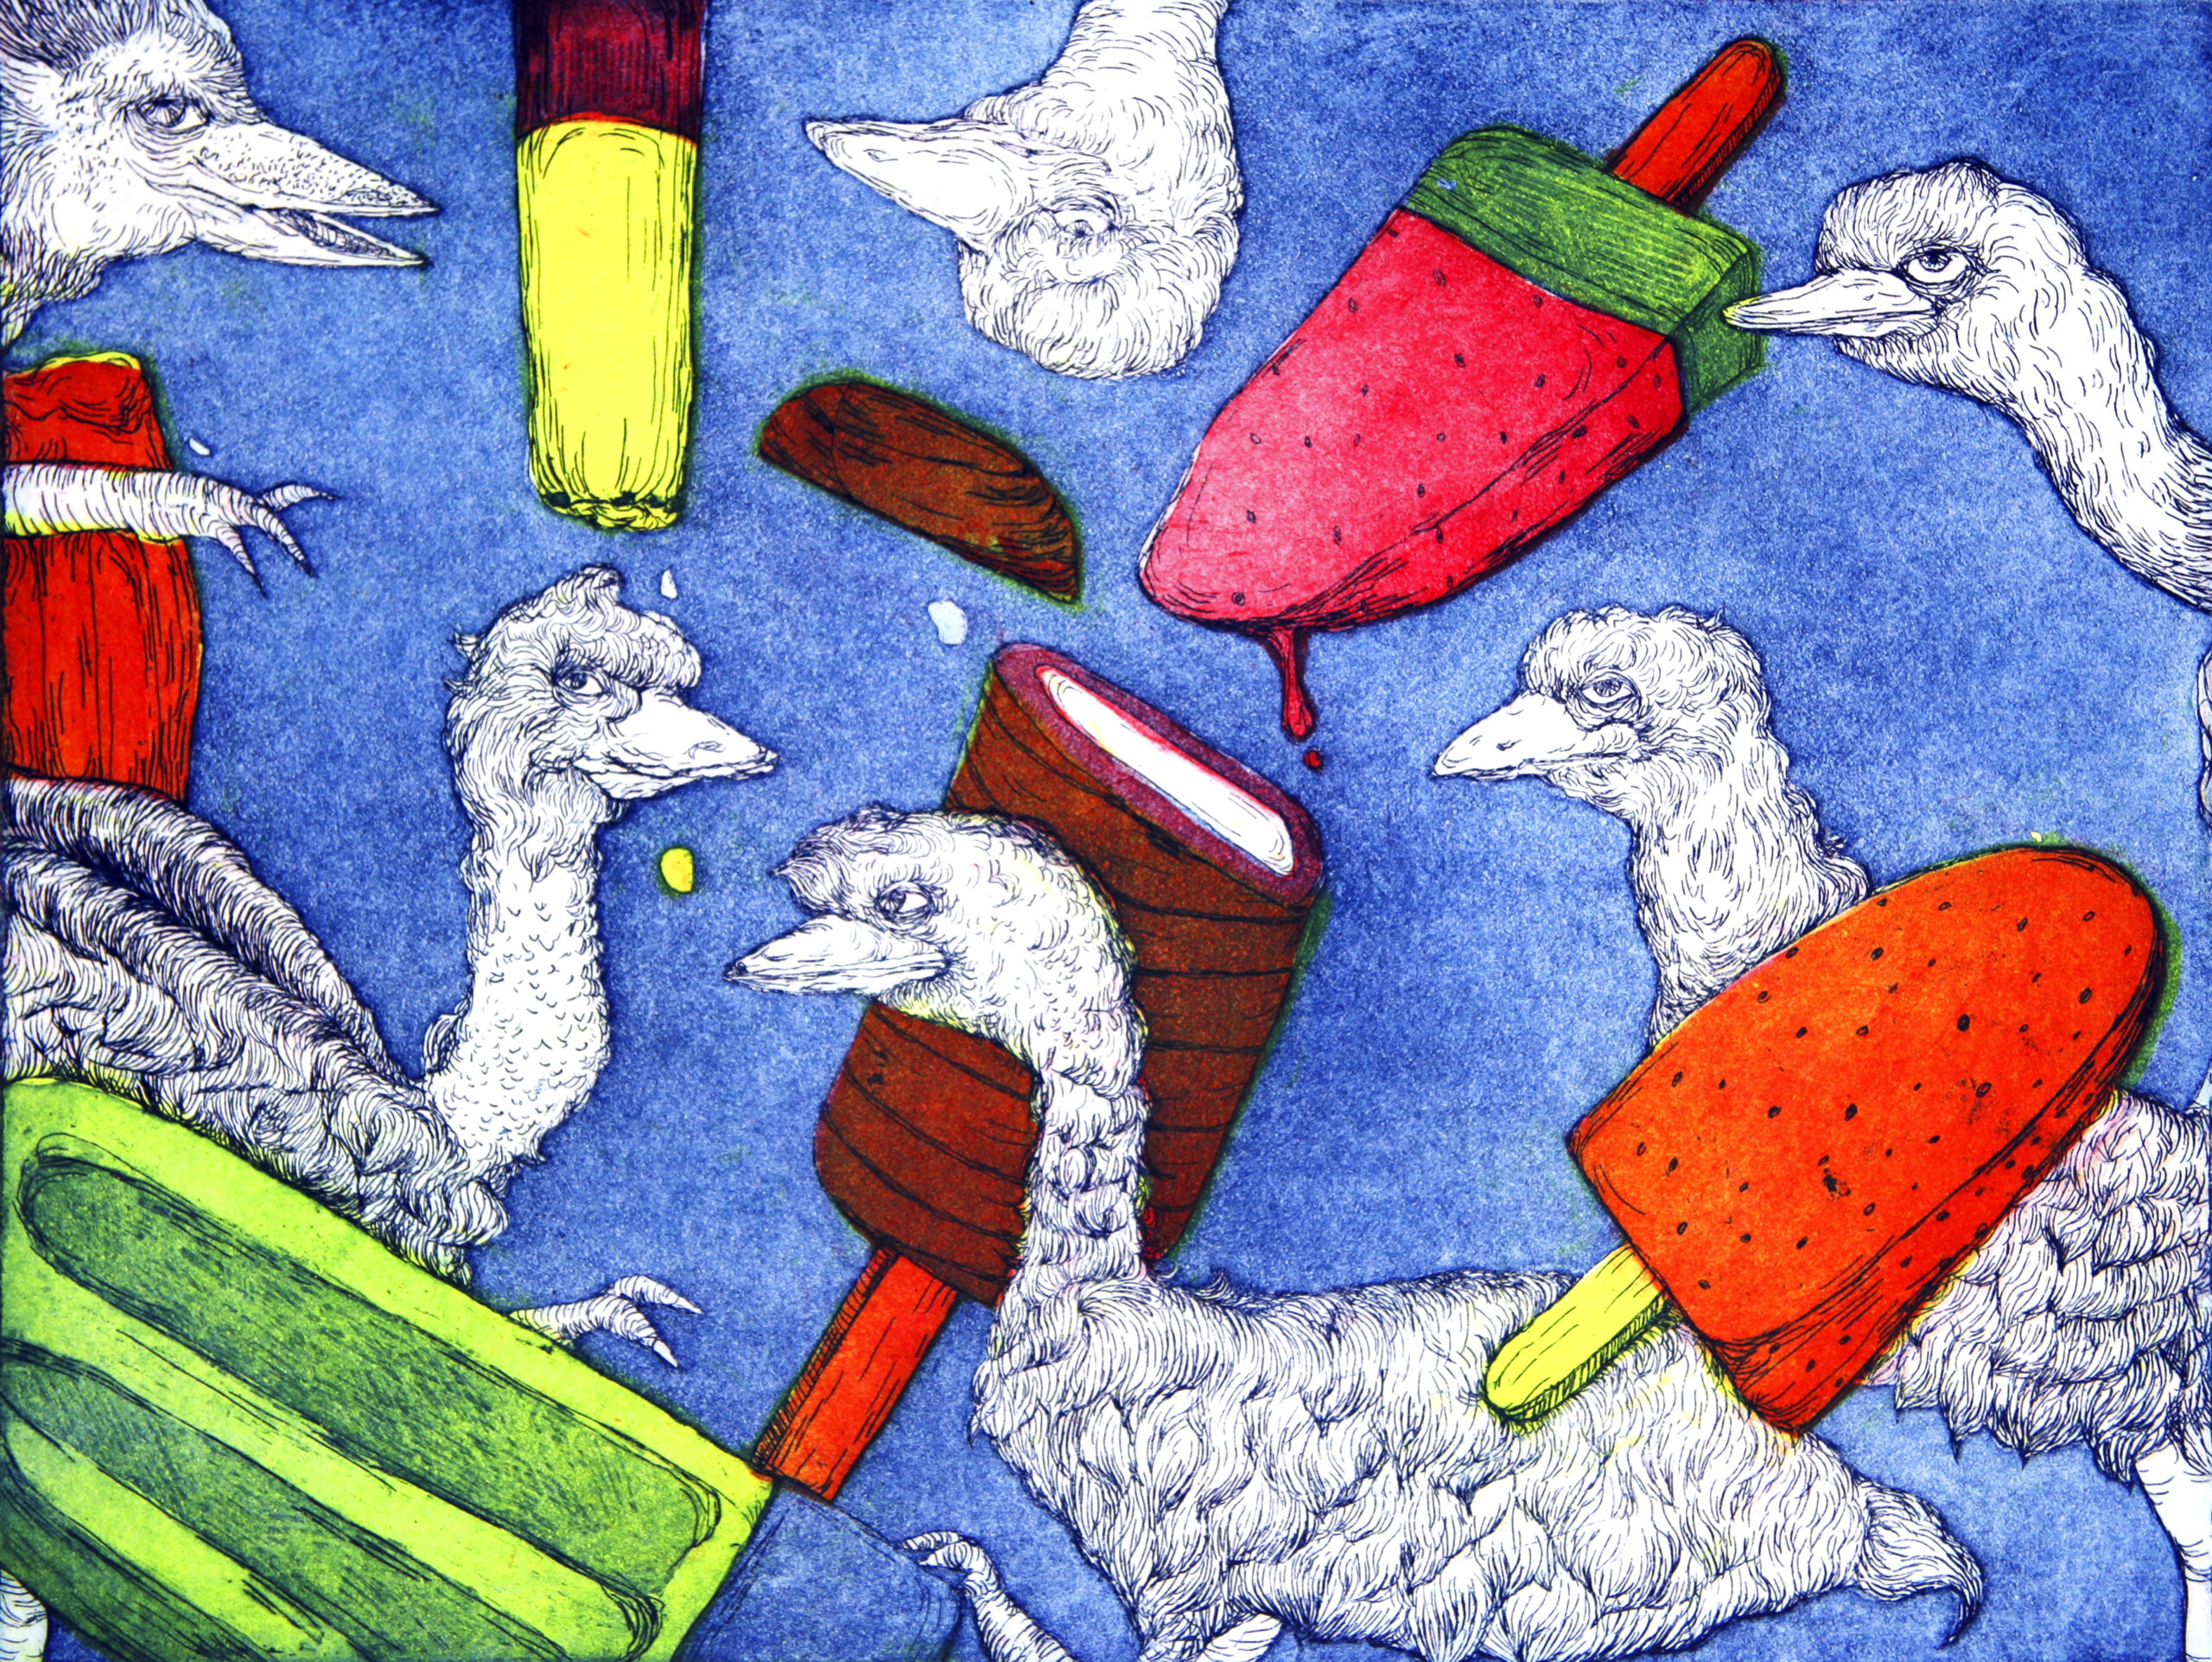 A copperplate etching featuring anthropomorphic emu mingling with colorful ice pops. The background is blue aquatint and the ice pops are colored with collagraph.